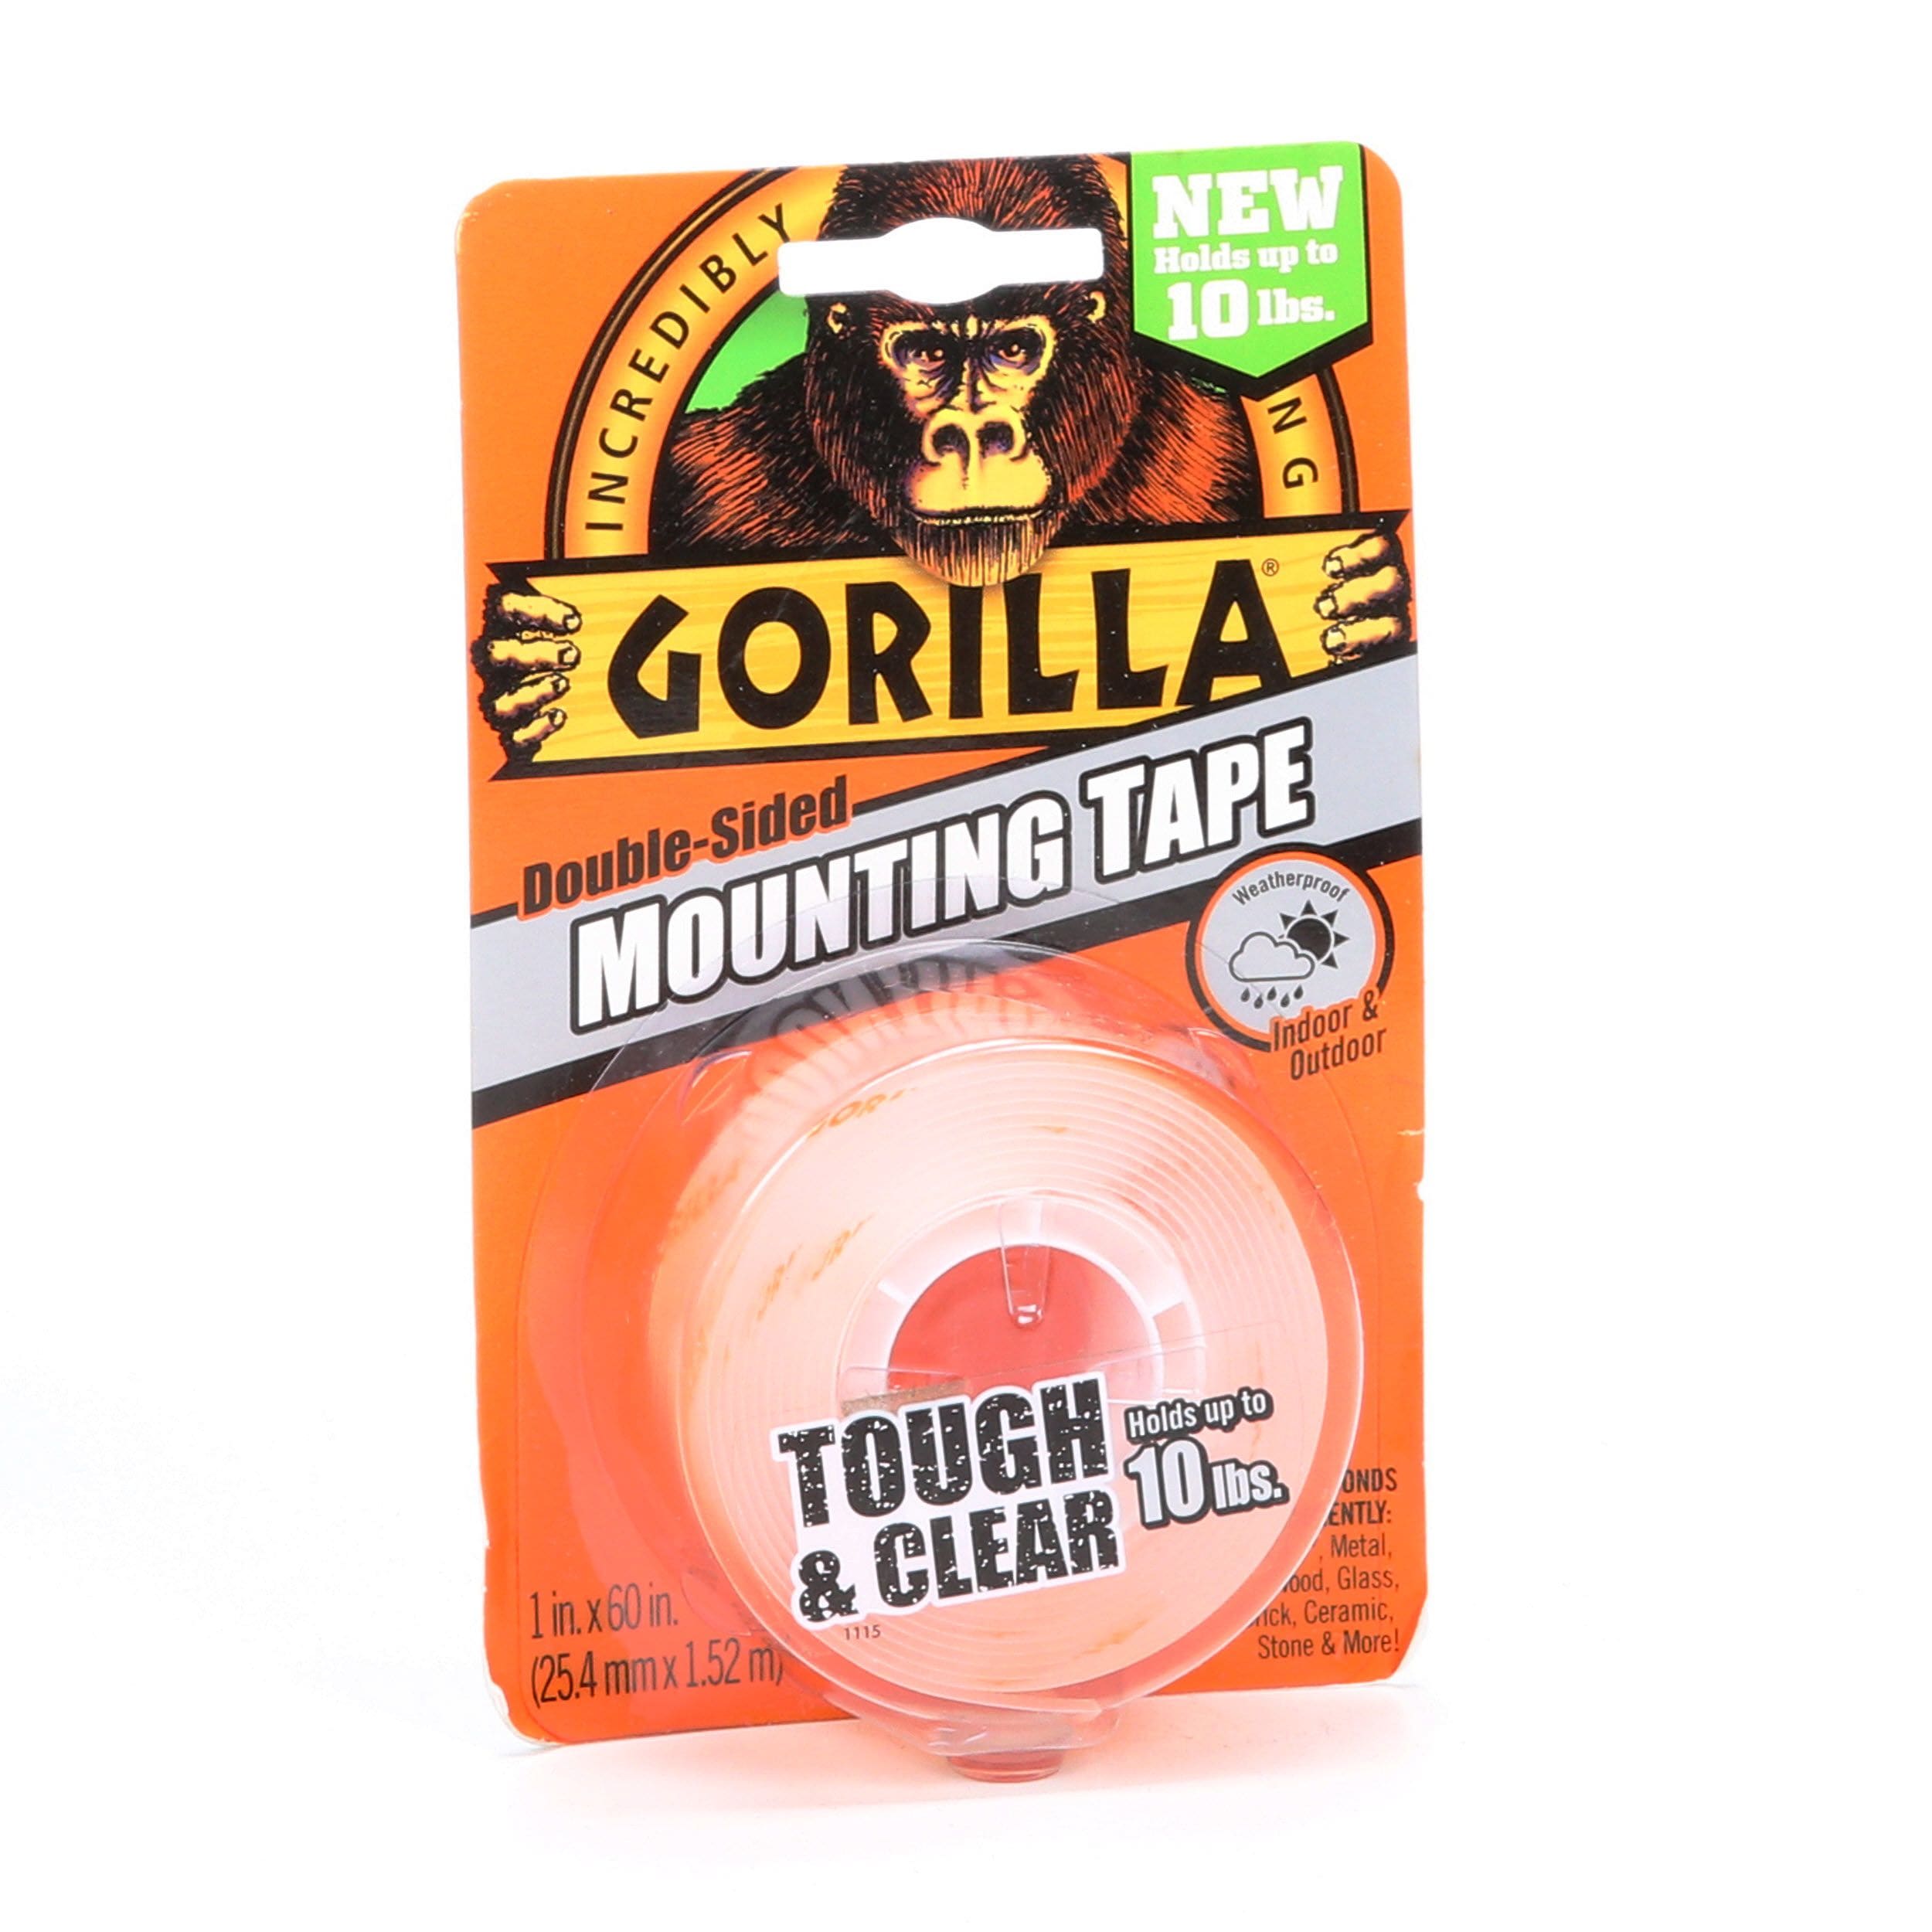 Gorilla Double-Sided Mounting Tape at Lowes.com